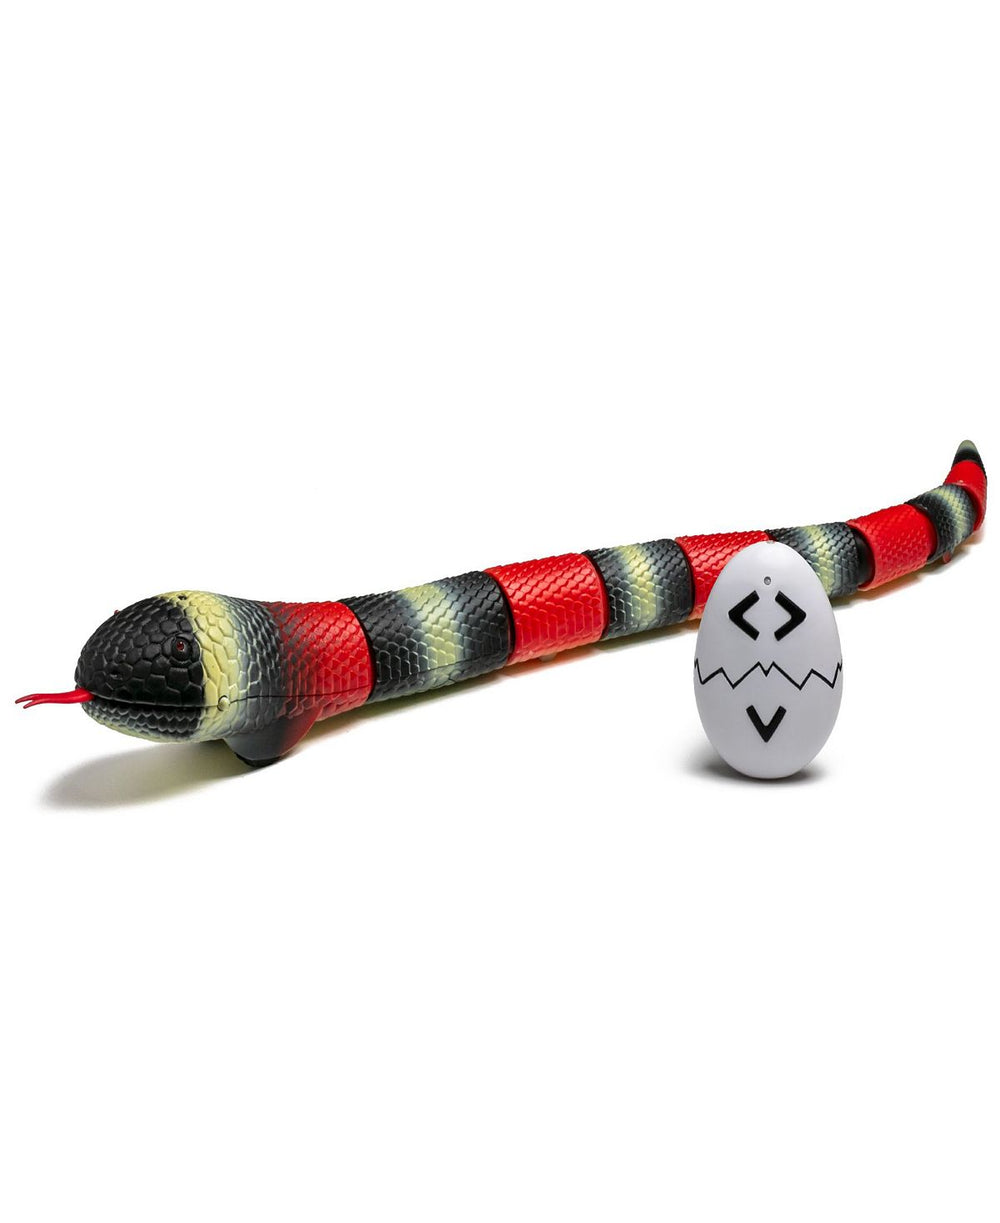 Discovery Kids Remote Control Lifelike King Snake Toy with LED Eyes